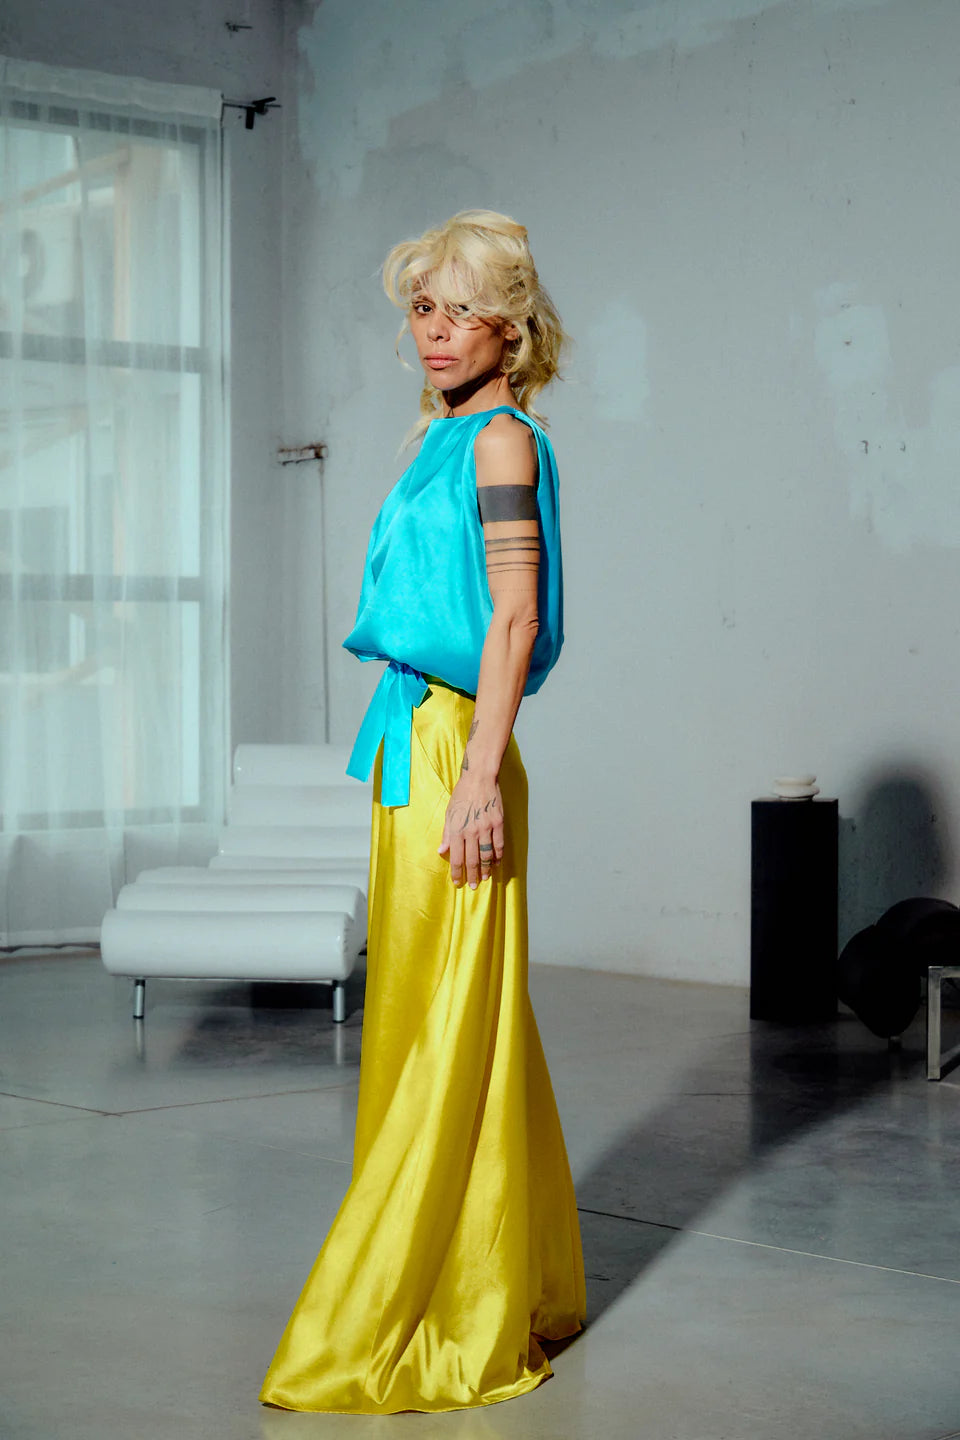 BLUE BOW-DETAIL BLOUSE & YELLOW MAXI SKIRT OUTFIT SET